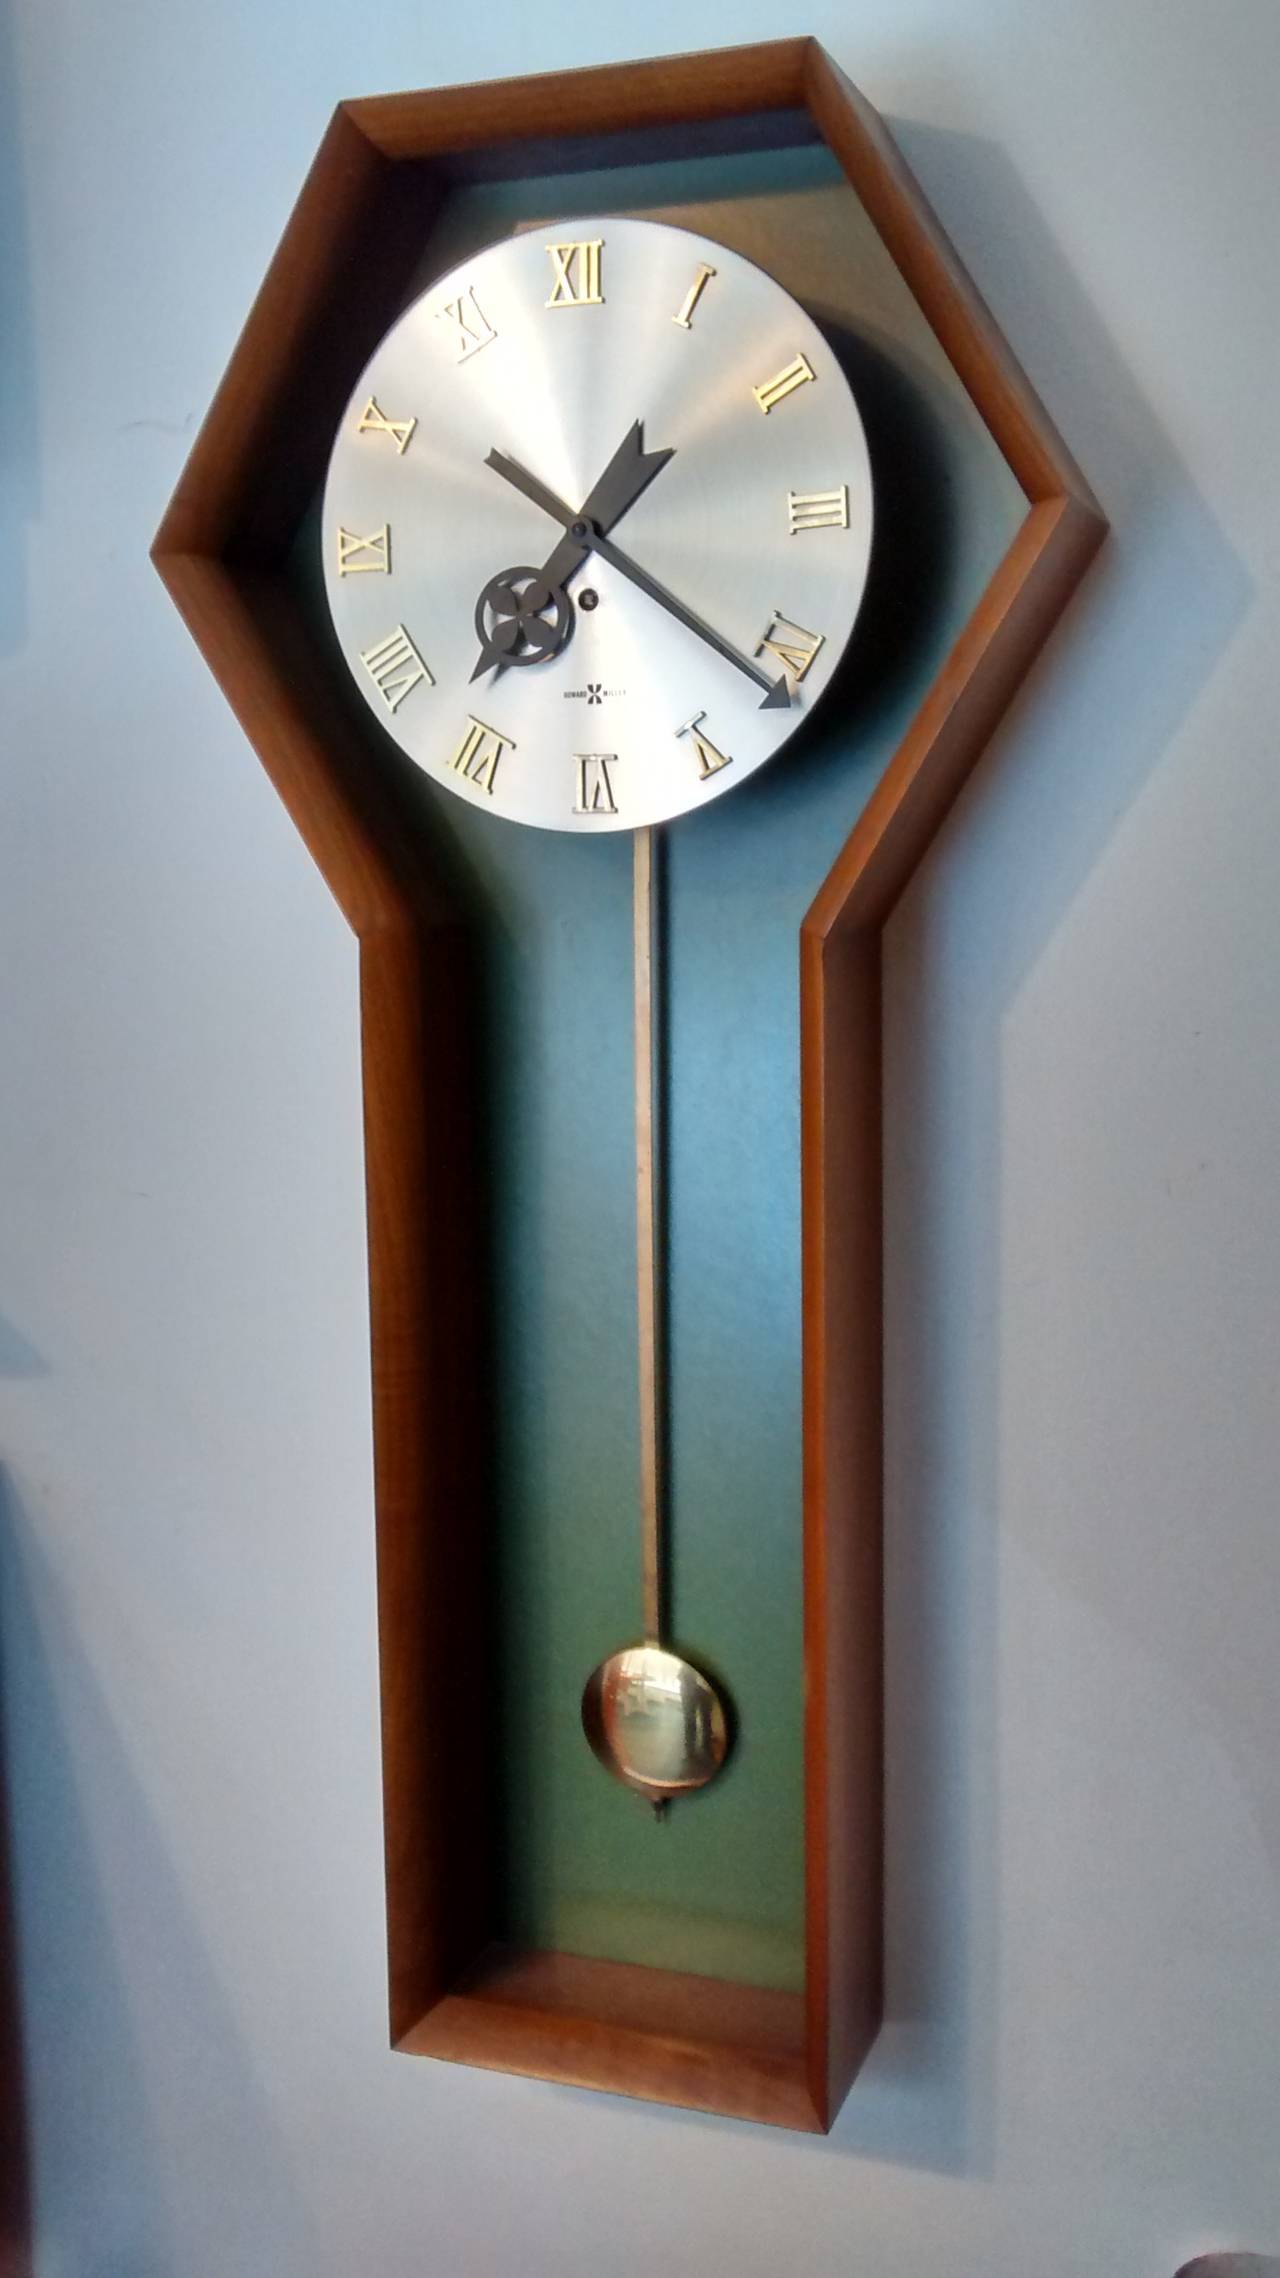 Superb recent find is this George Nelson designed wall mounted pendulum clock for the Howard Miller Clock Company of Zeeland, Michigan. 

Case rendered in American walnut, and shaped like a keyhole or coffin, this well known model is increasingly